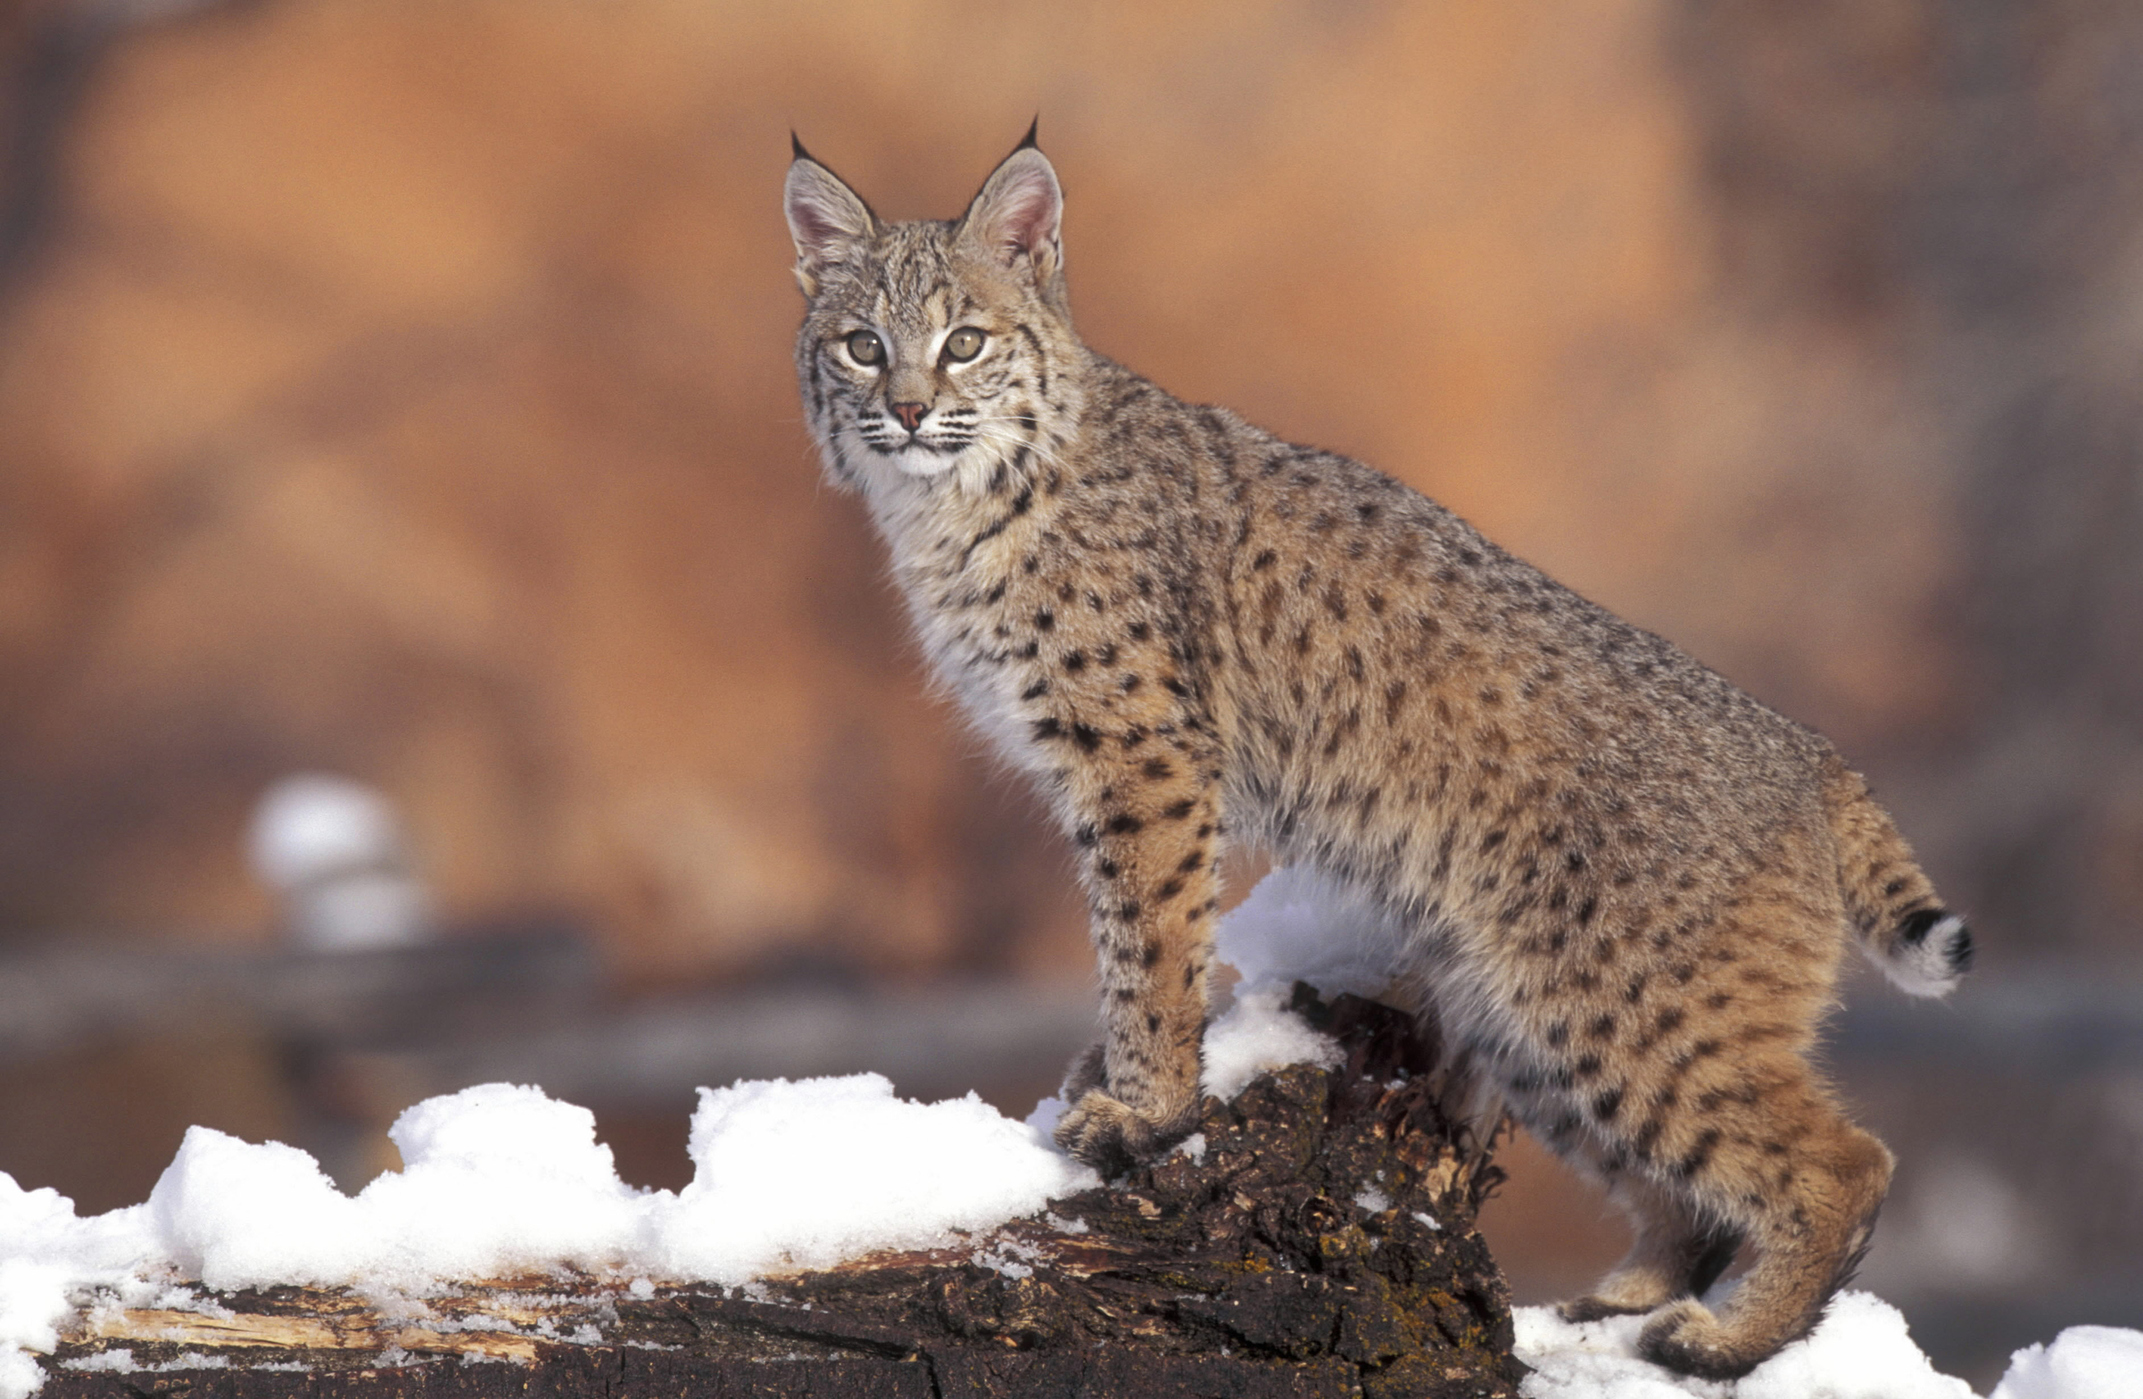 A bobcat standing on snowy ground